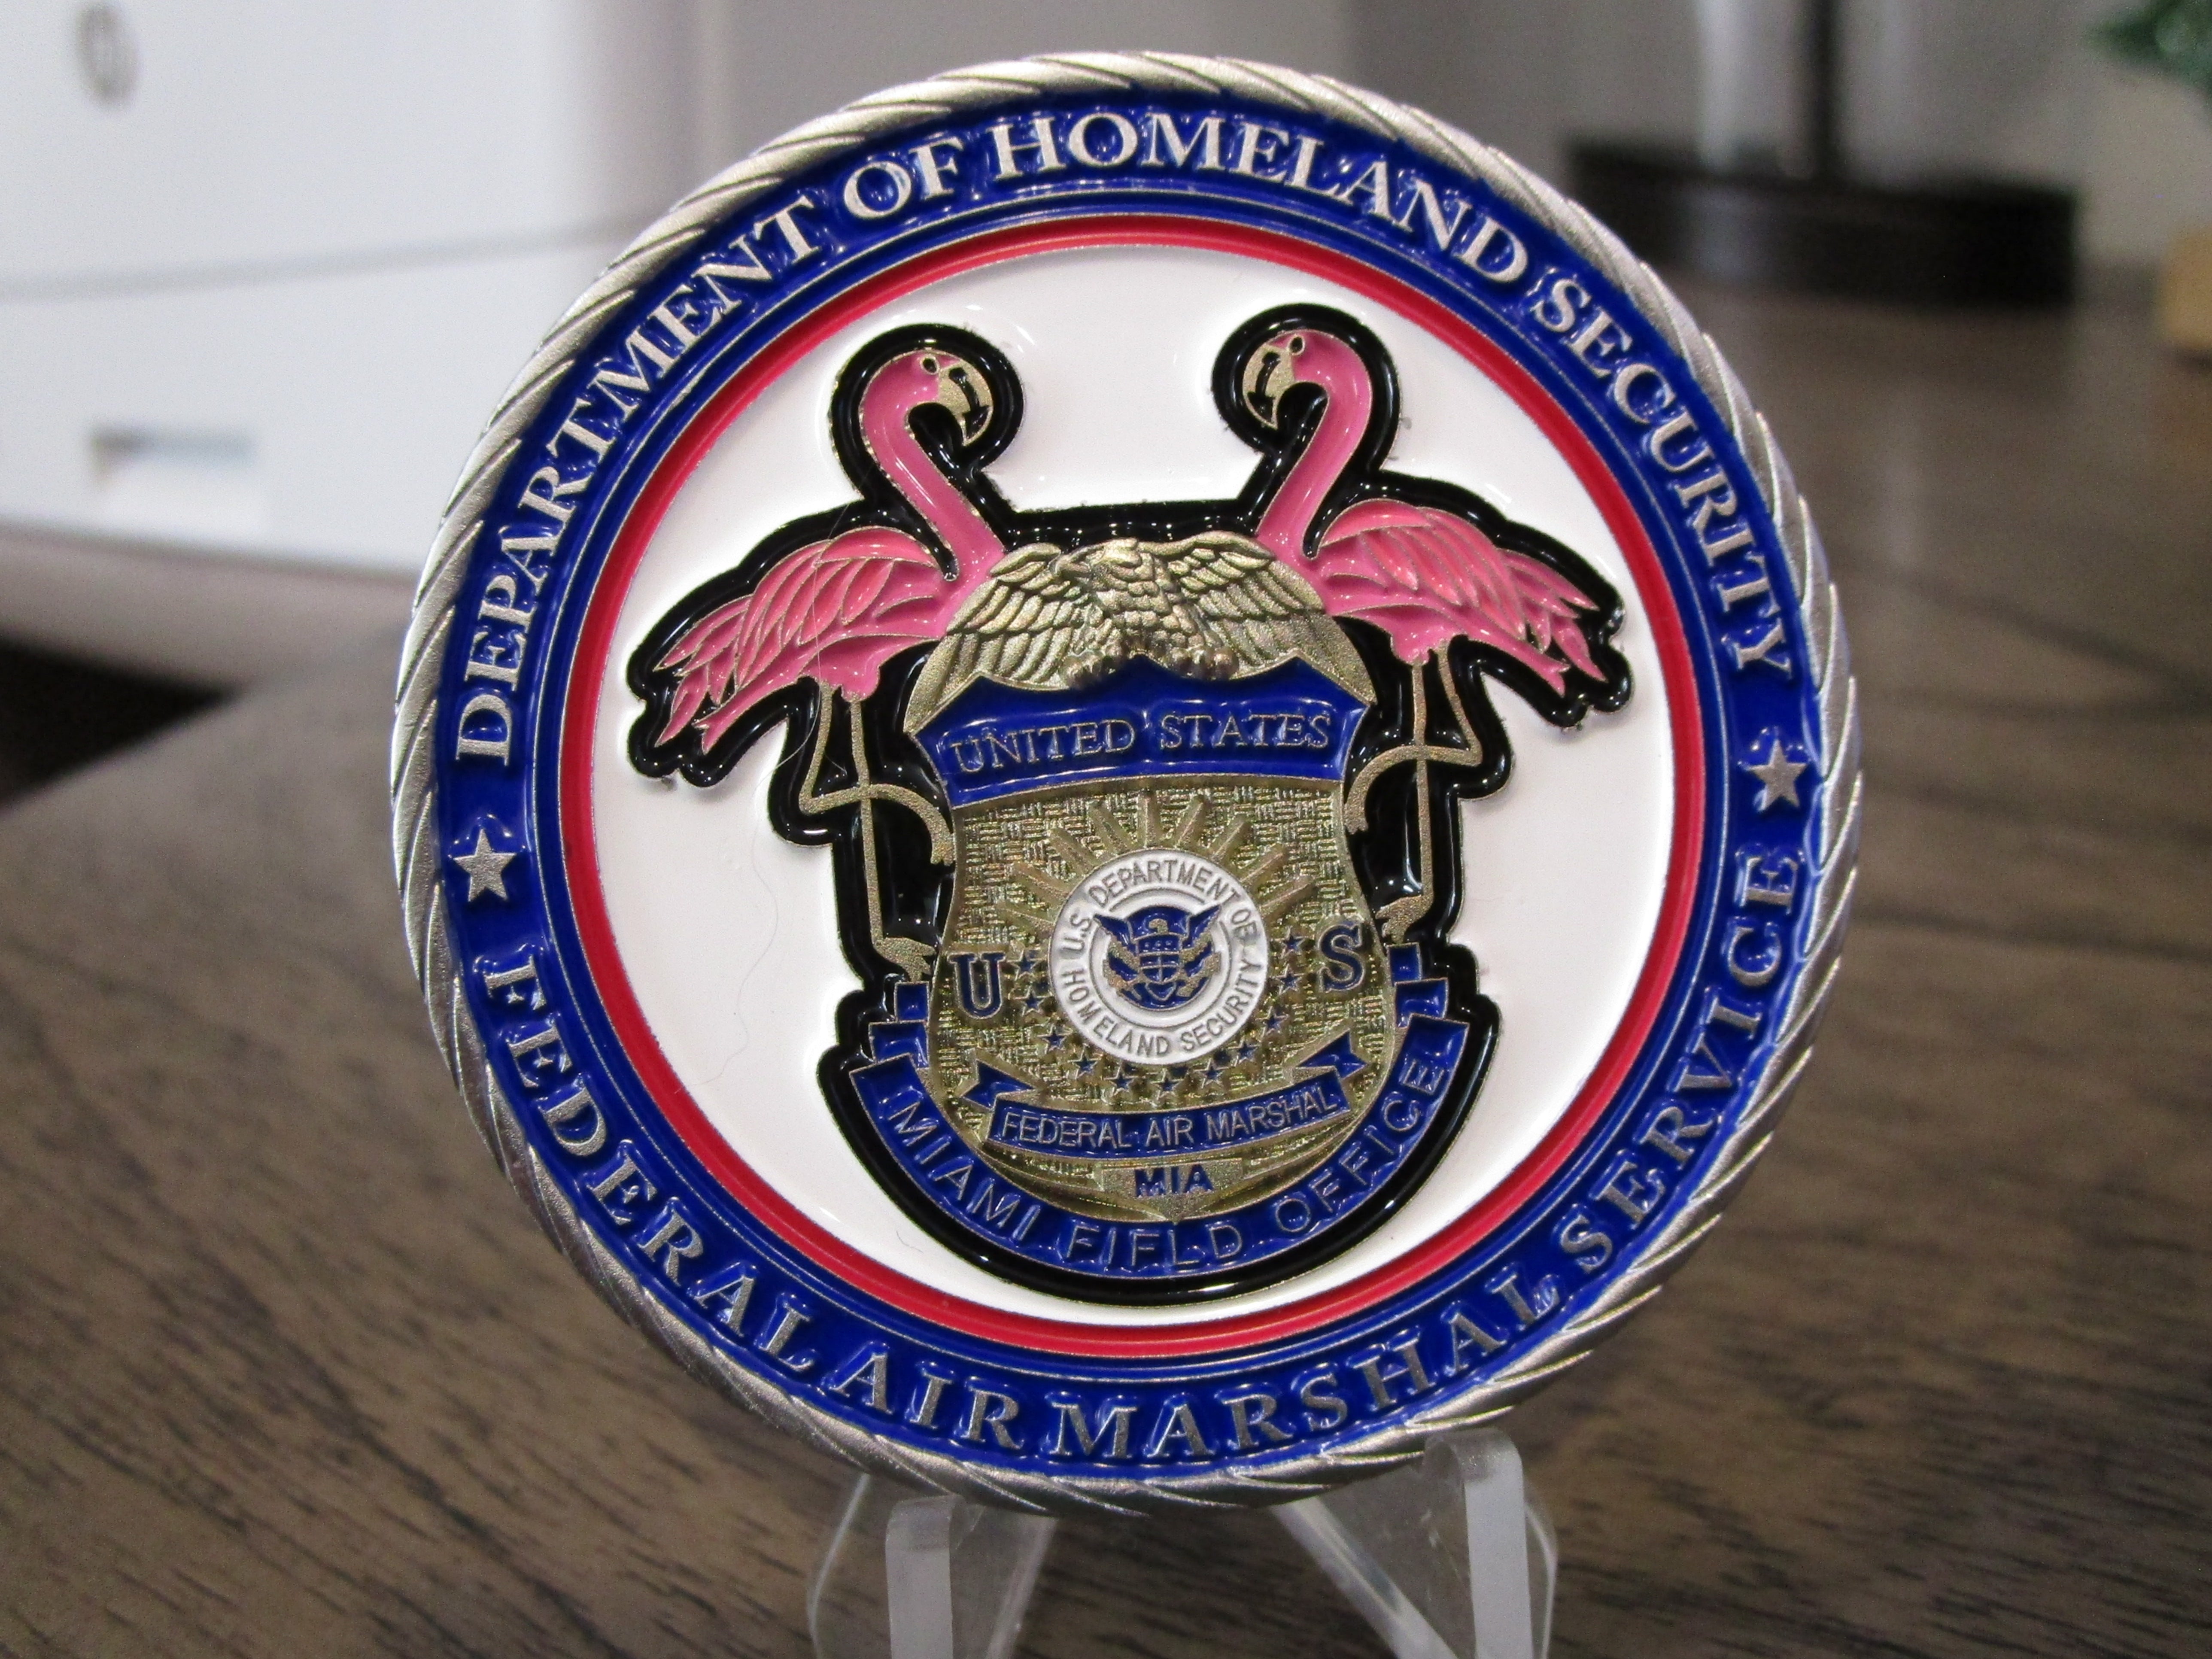 FAMS Federal Air Marshal FAM Miami Field Office Challenge Coin